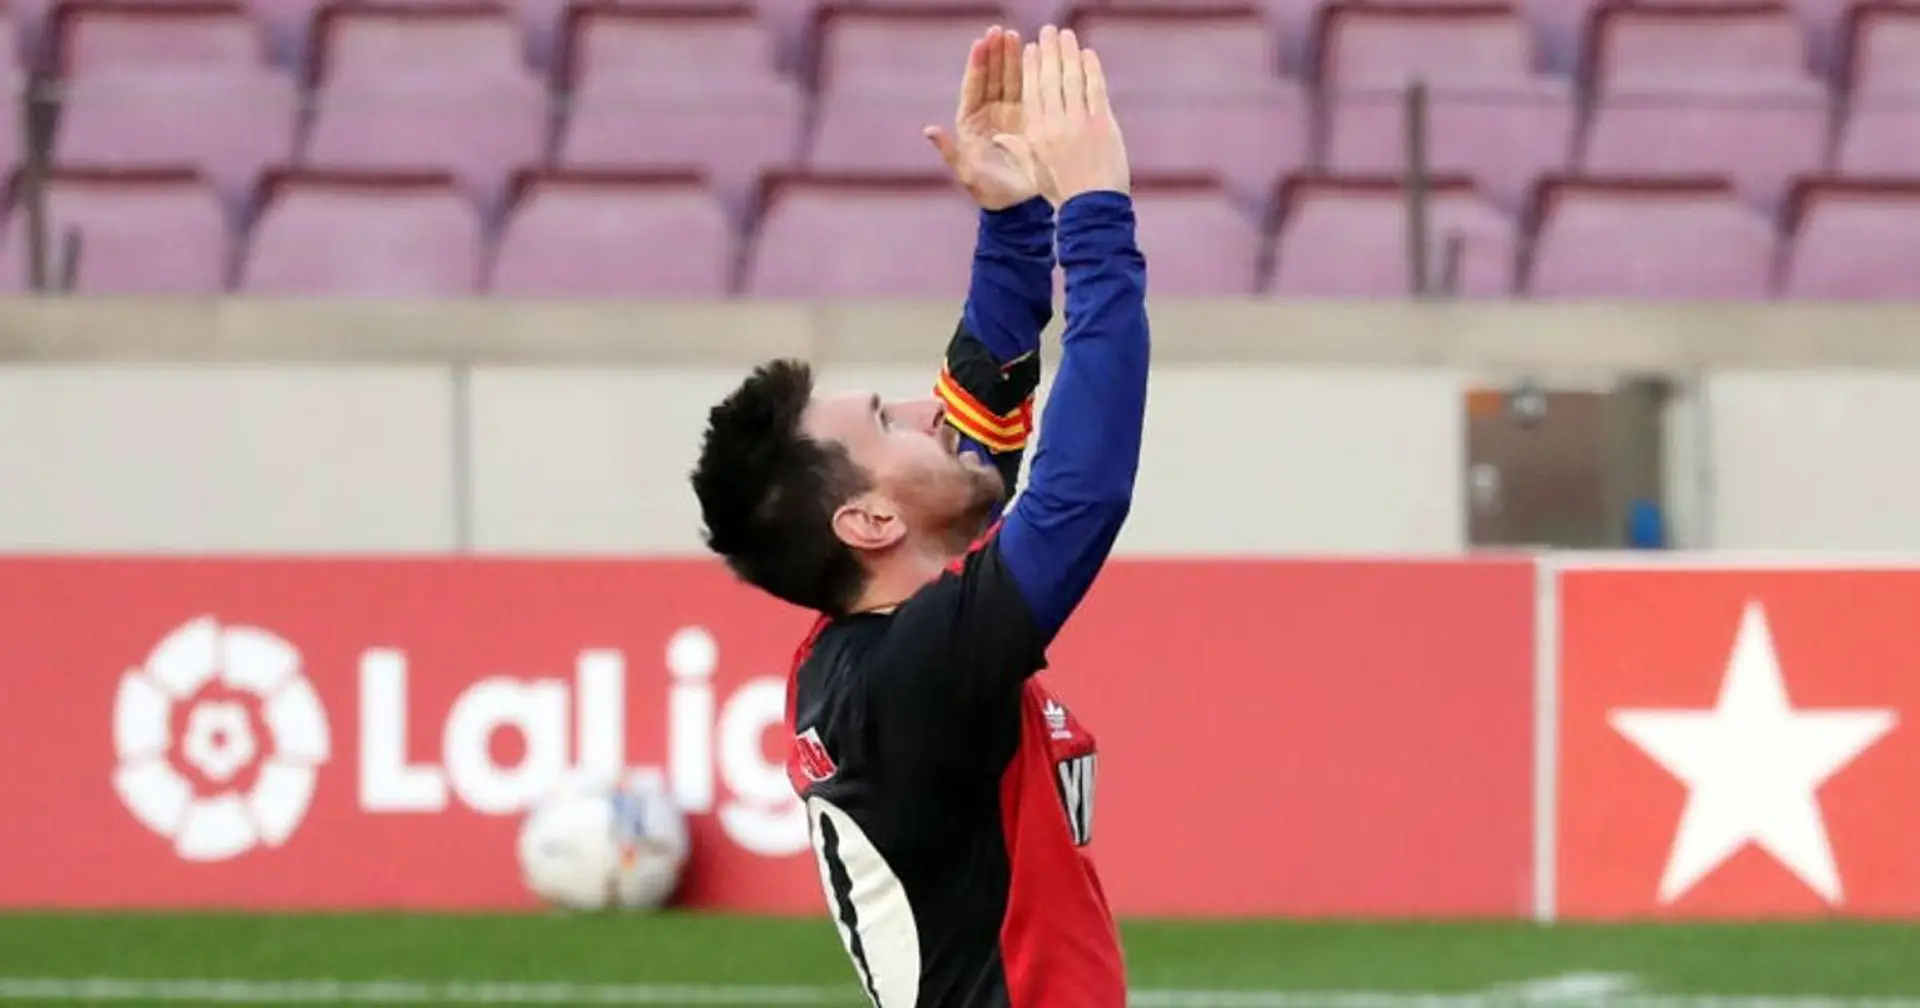 From humble gift to historic moment: story behind Messi's Newell's shirt in Maradona tribute